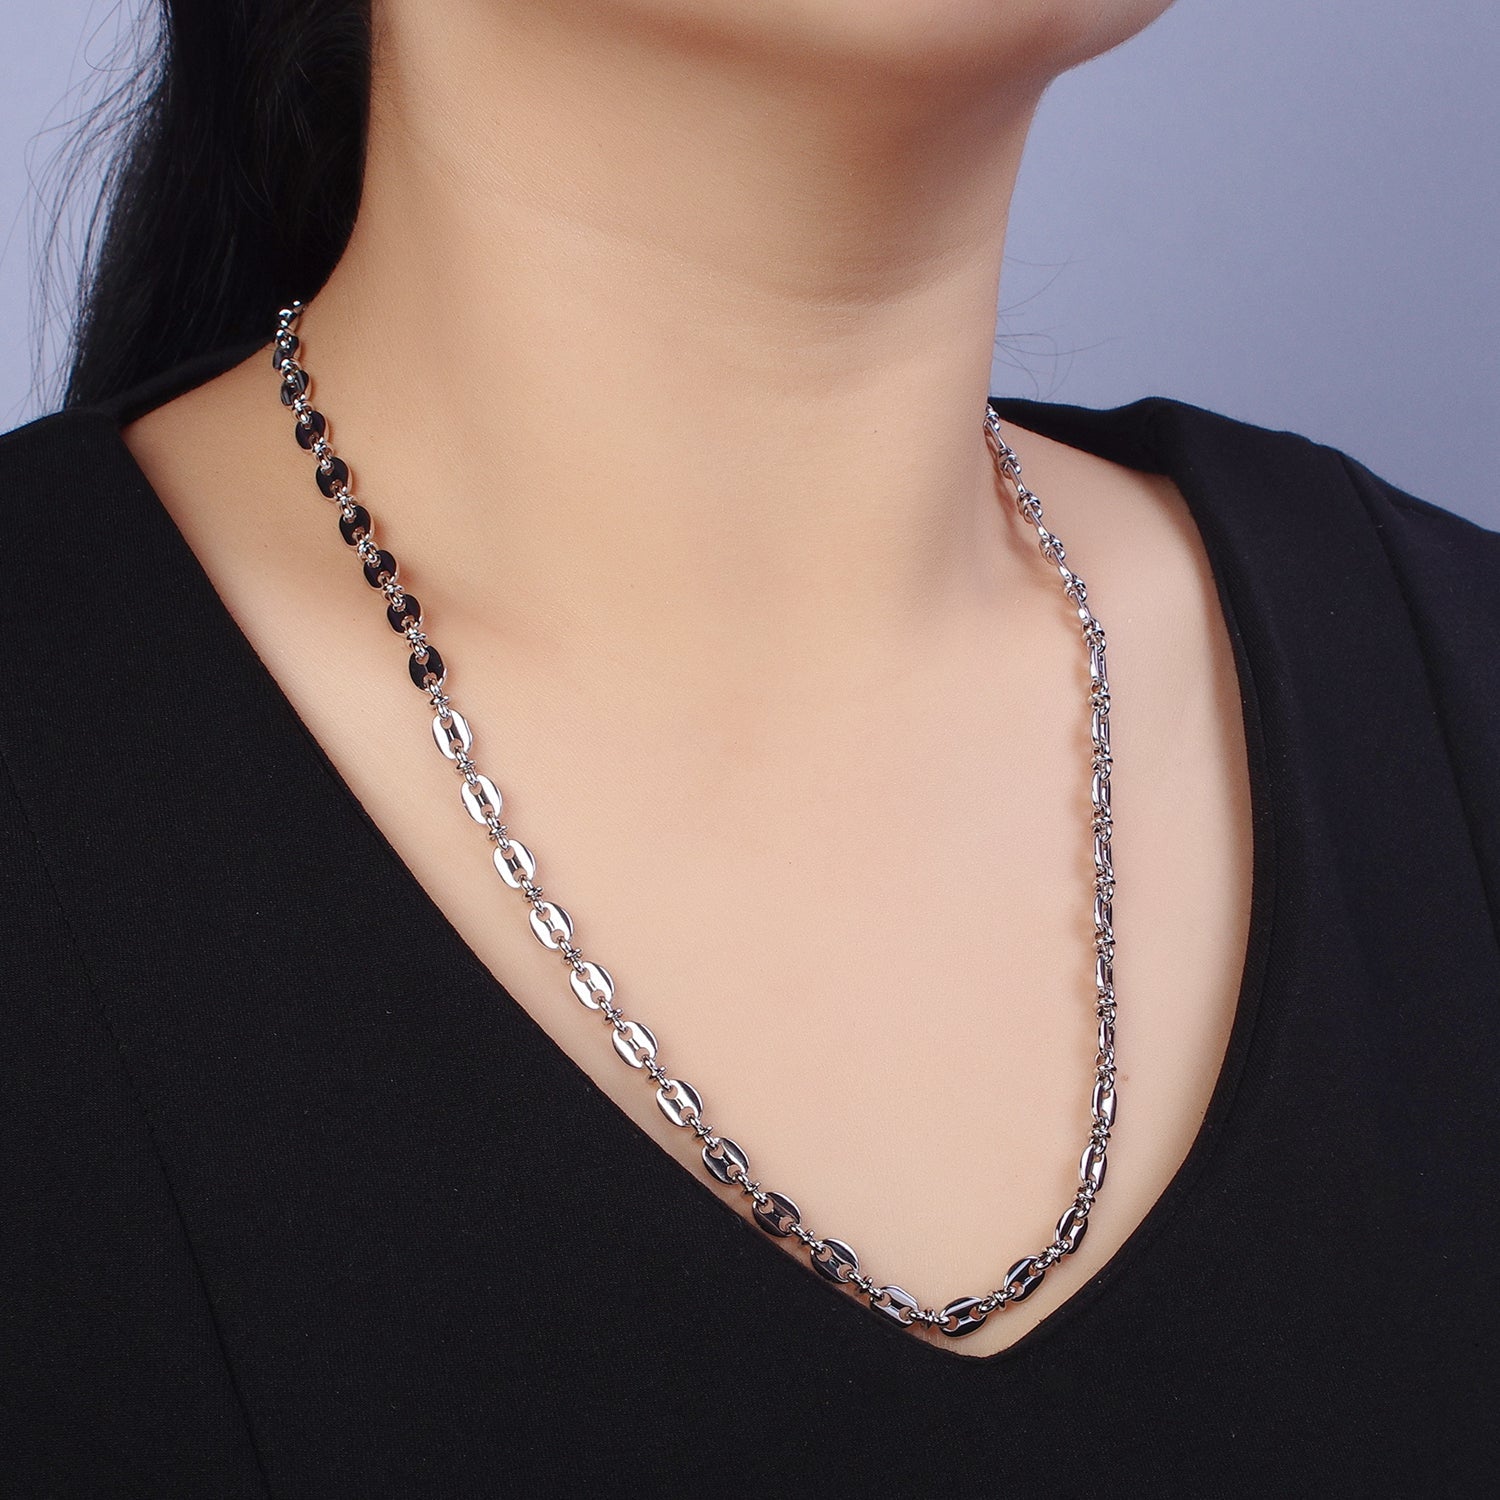 6mm Silver Anchor Mariner Link Chain Necklace Long Necklace Statement Unisex Chain Necklace, Gift For Him or Her WA-1595 - DLUXCA